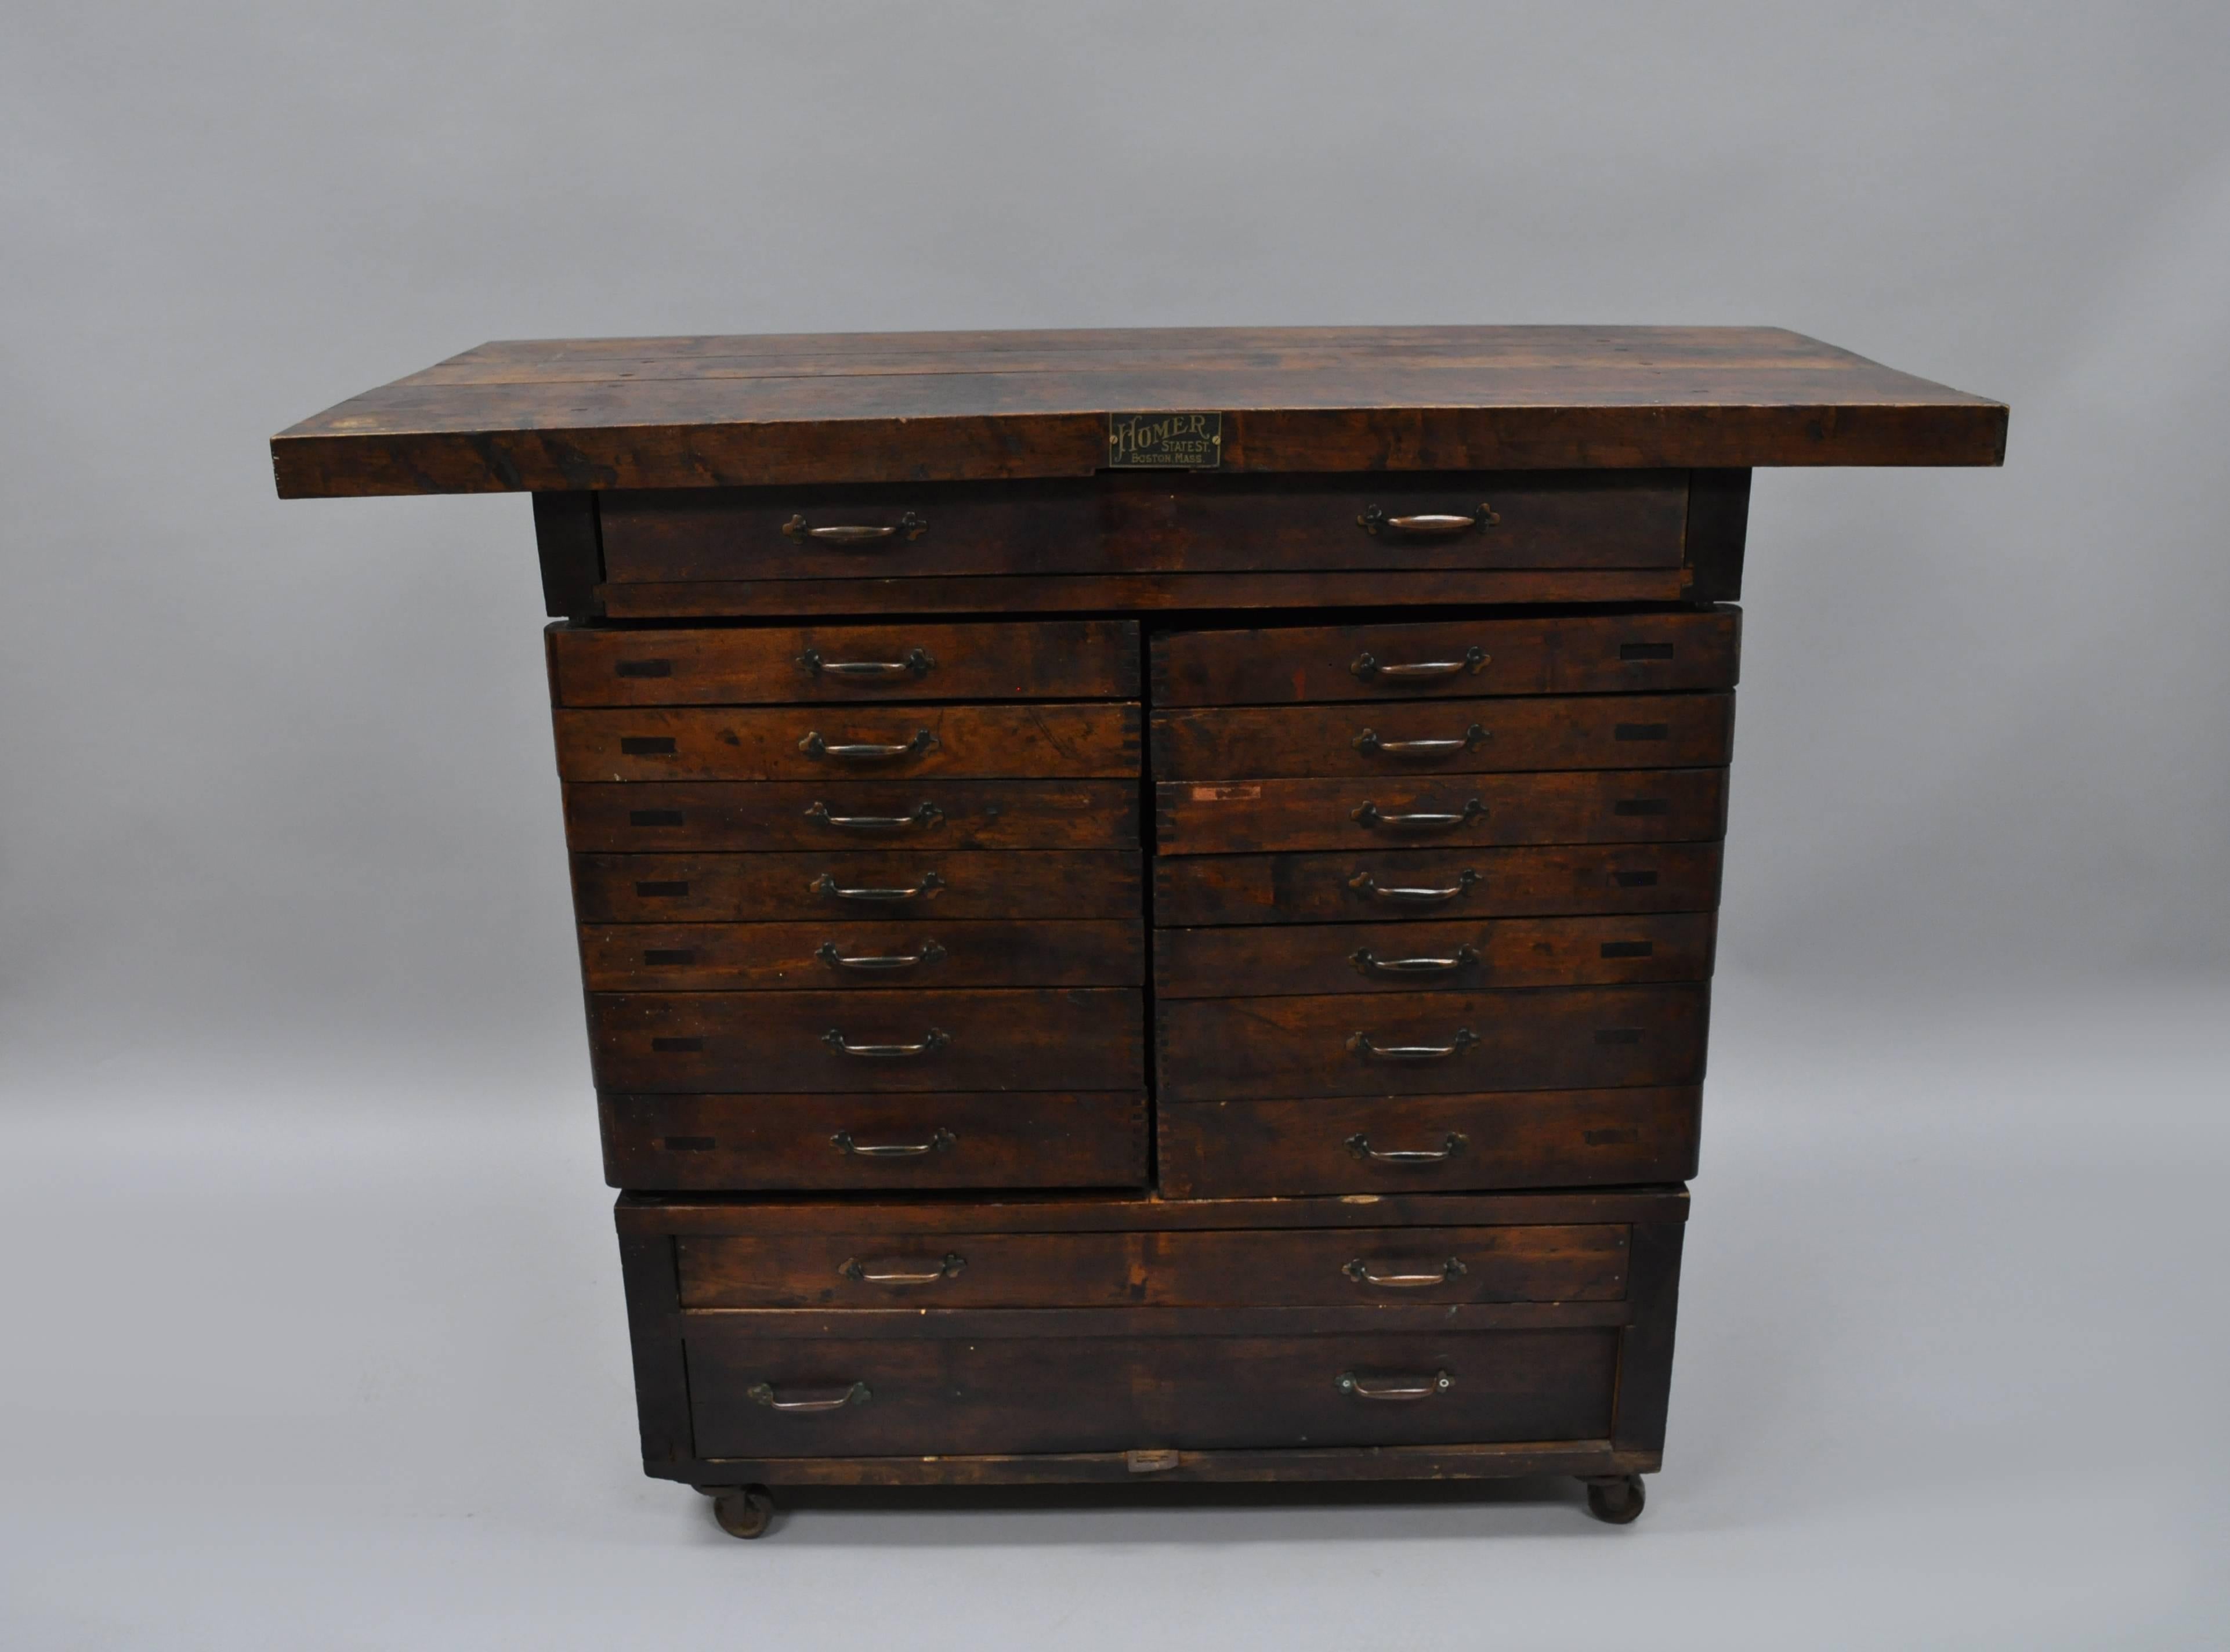 Antique work cabinet by Homer State St. Boston, MA, circa Early 1900s. Item features solid wood construction, 14 swing hinged staggered drawers, three flat drawers, metal rolling casters, beautiful patina, plenty of storage, original metal tag, very